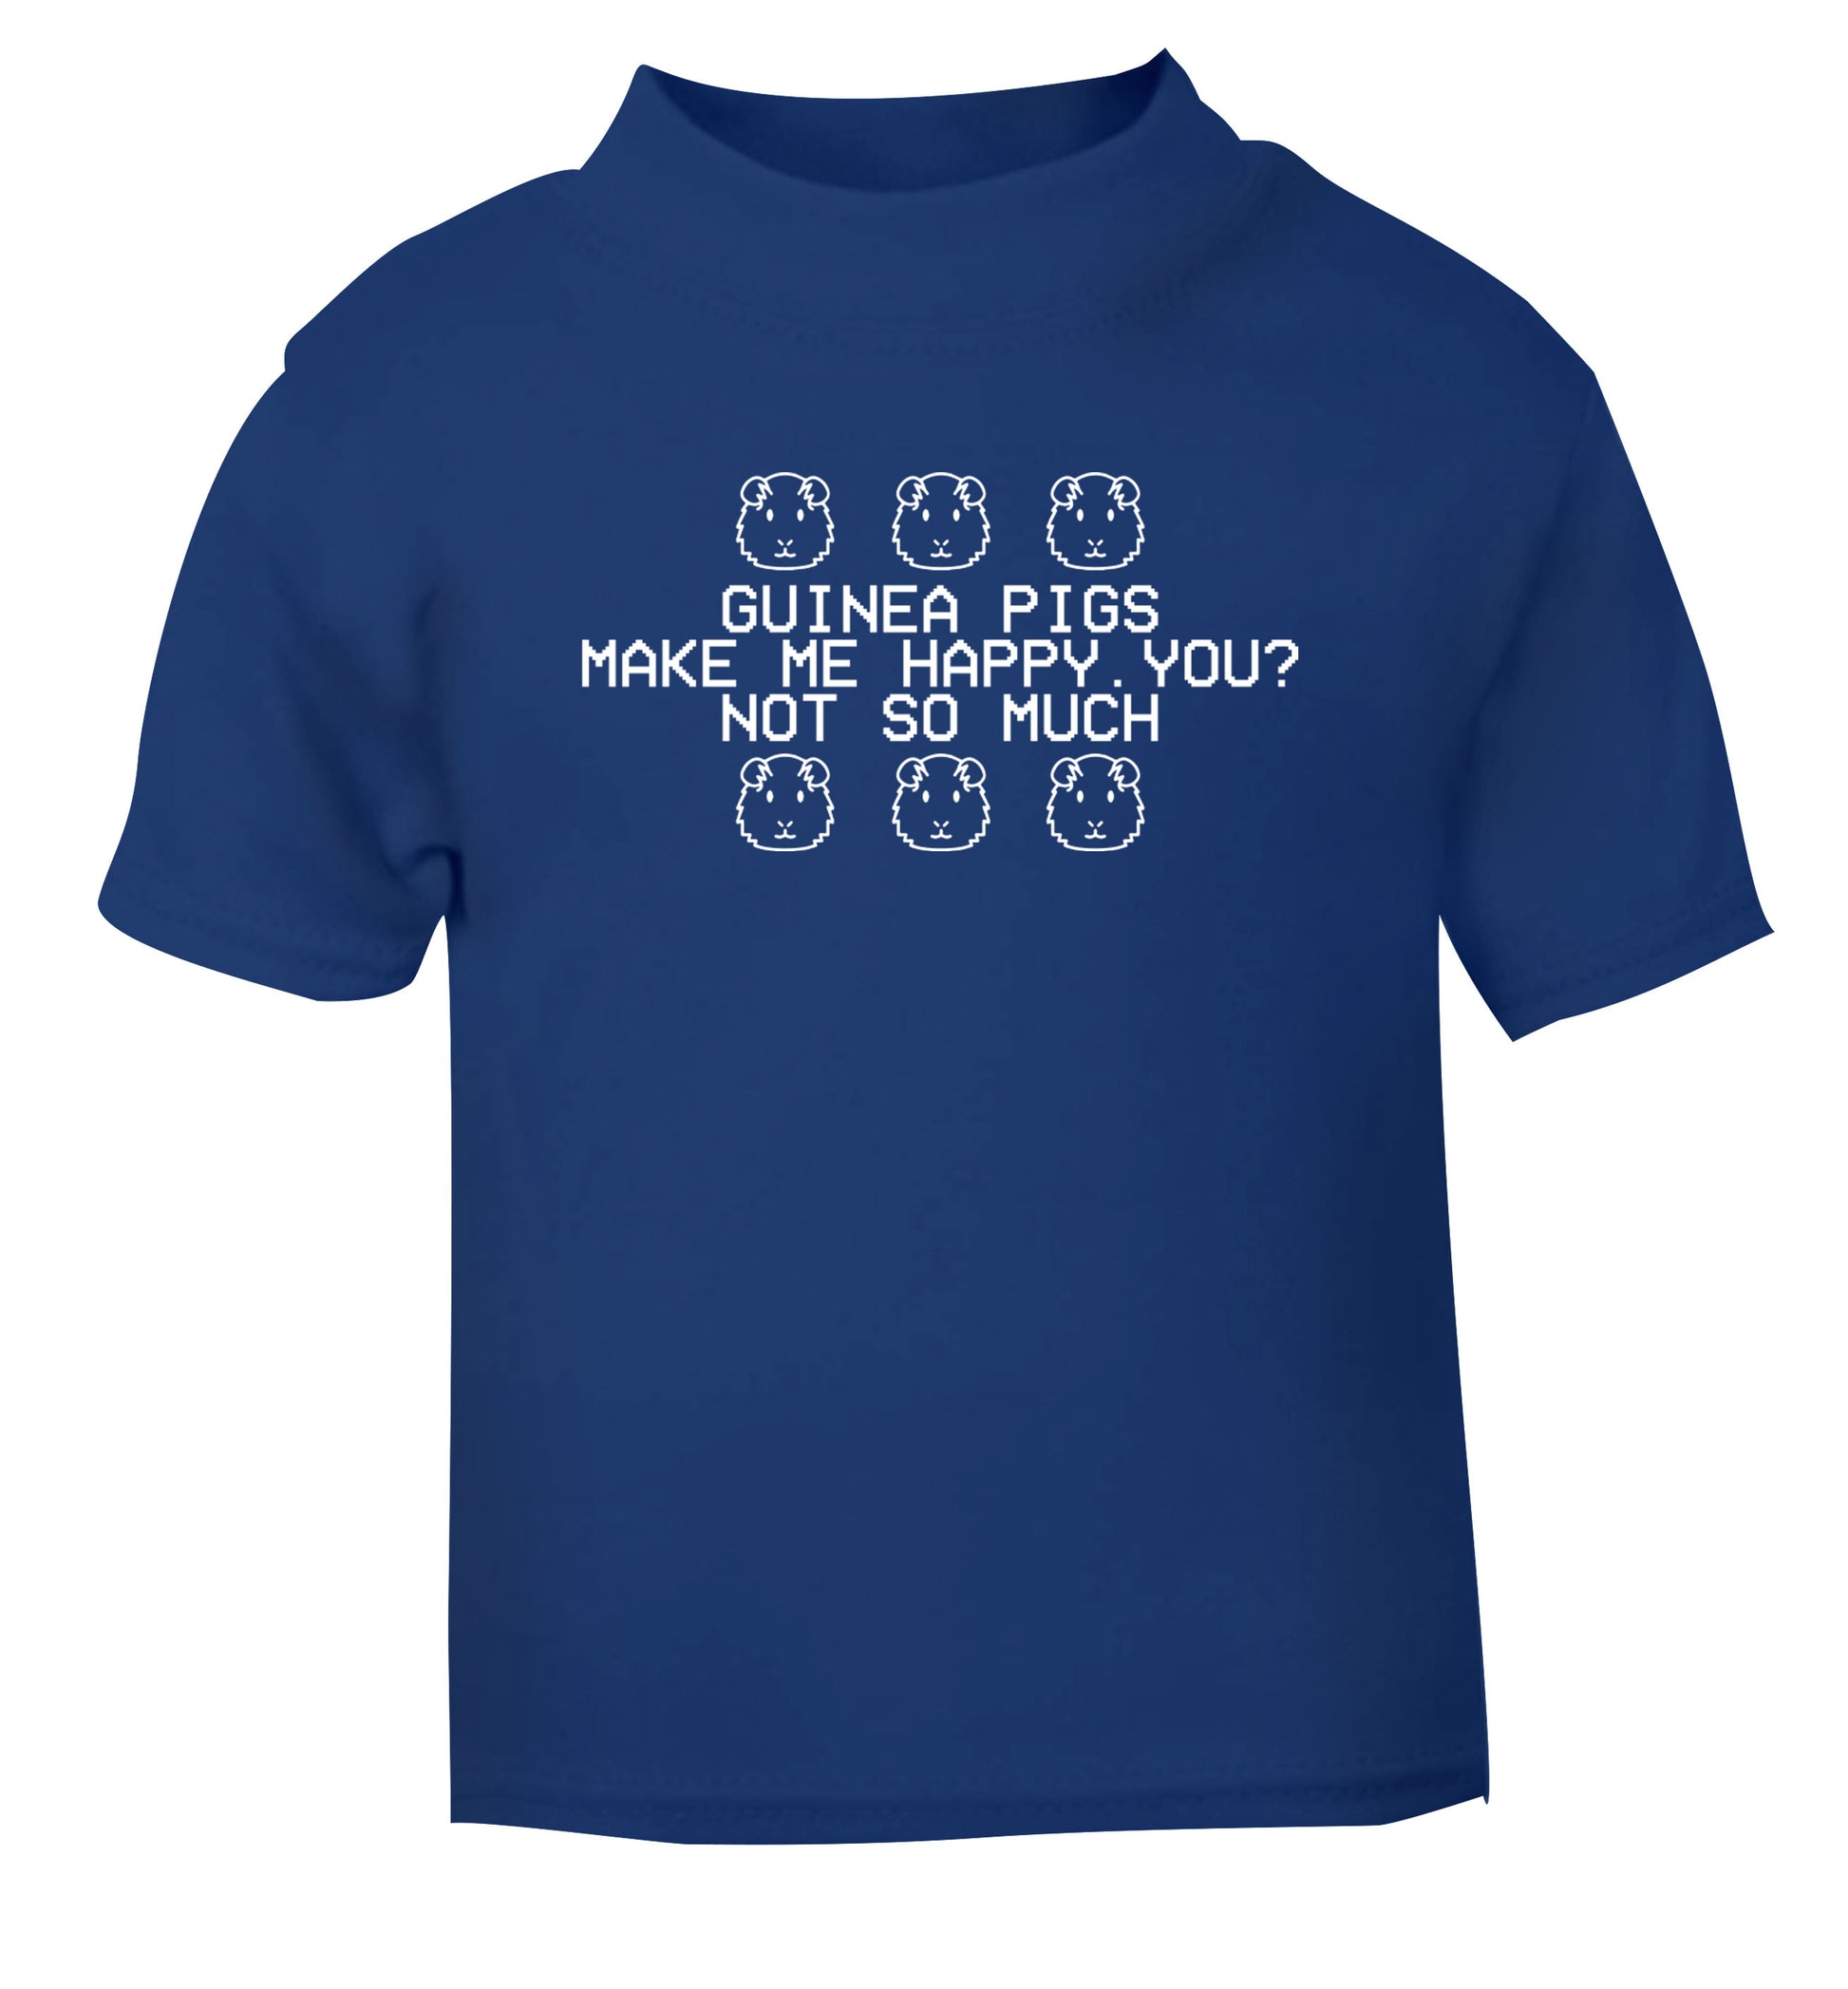 Guinea pigs make me happy, you not so much blue Baby Toddler Tshirt 2 Years